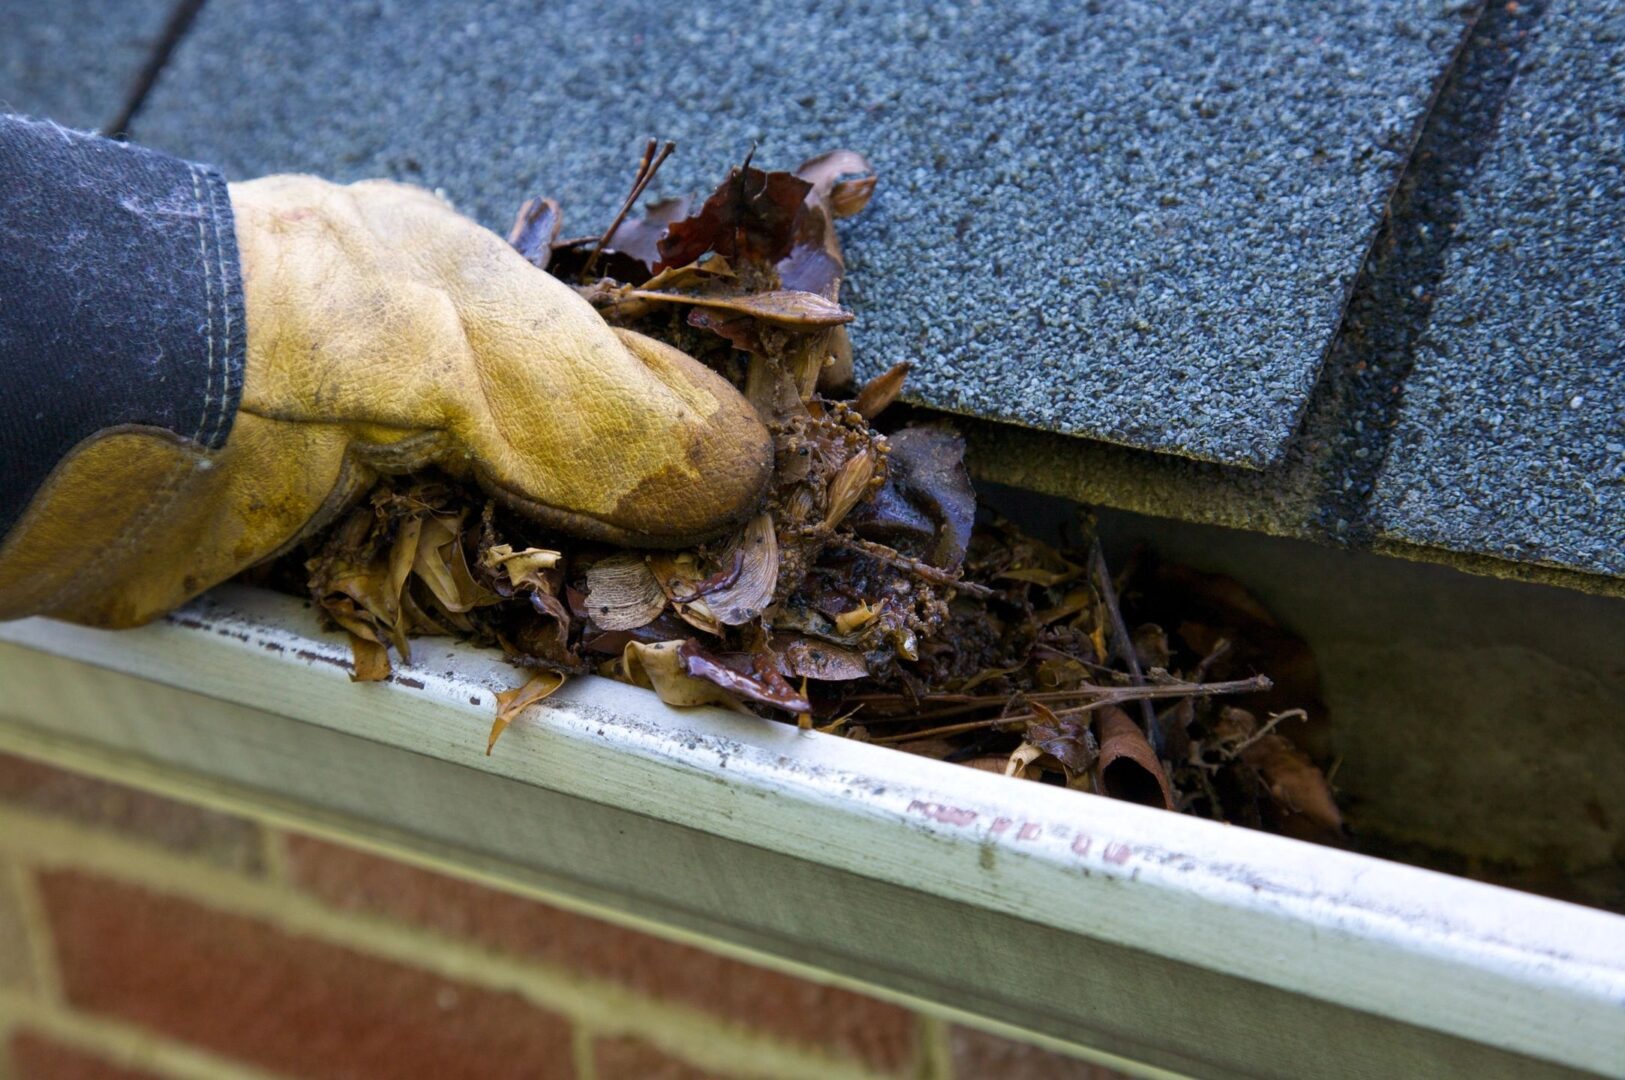 A person is cleaning leaves from the gutter.